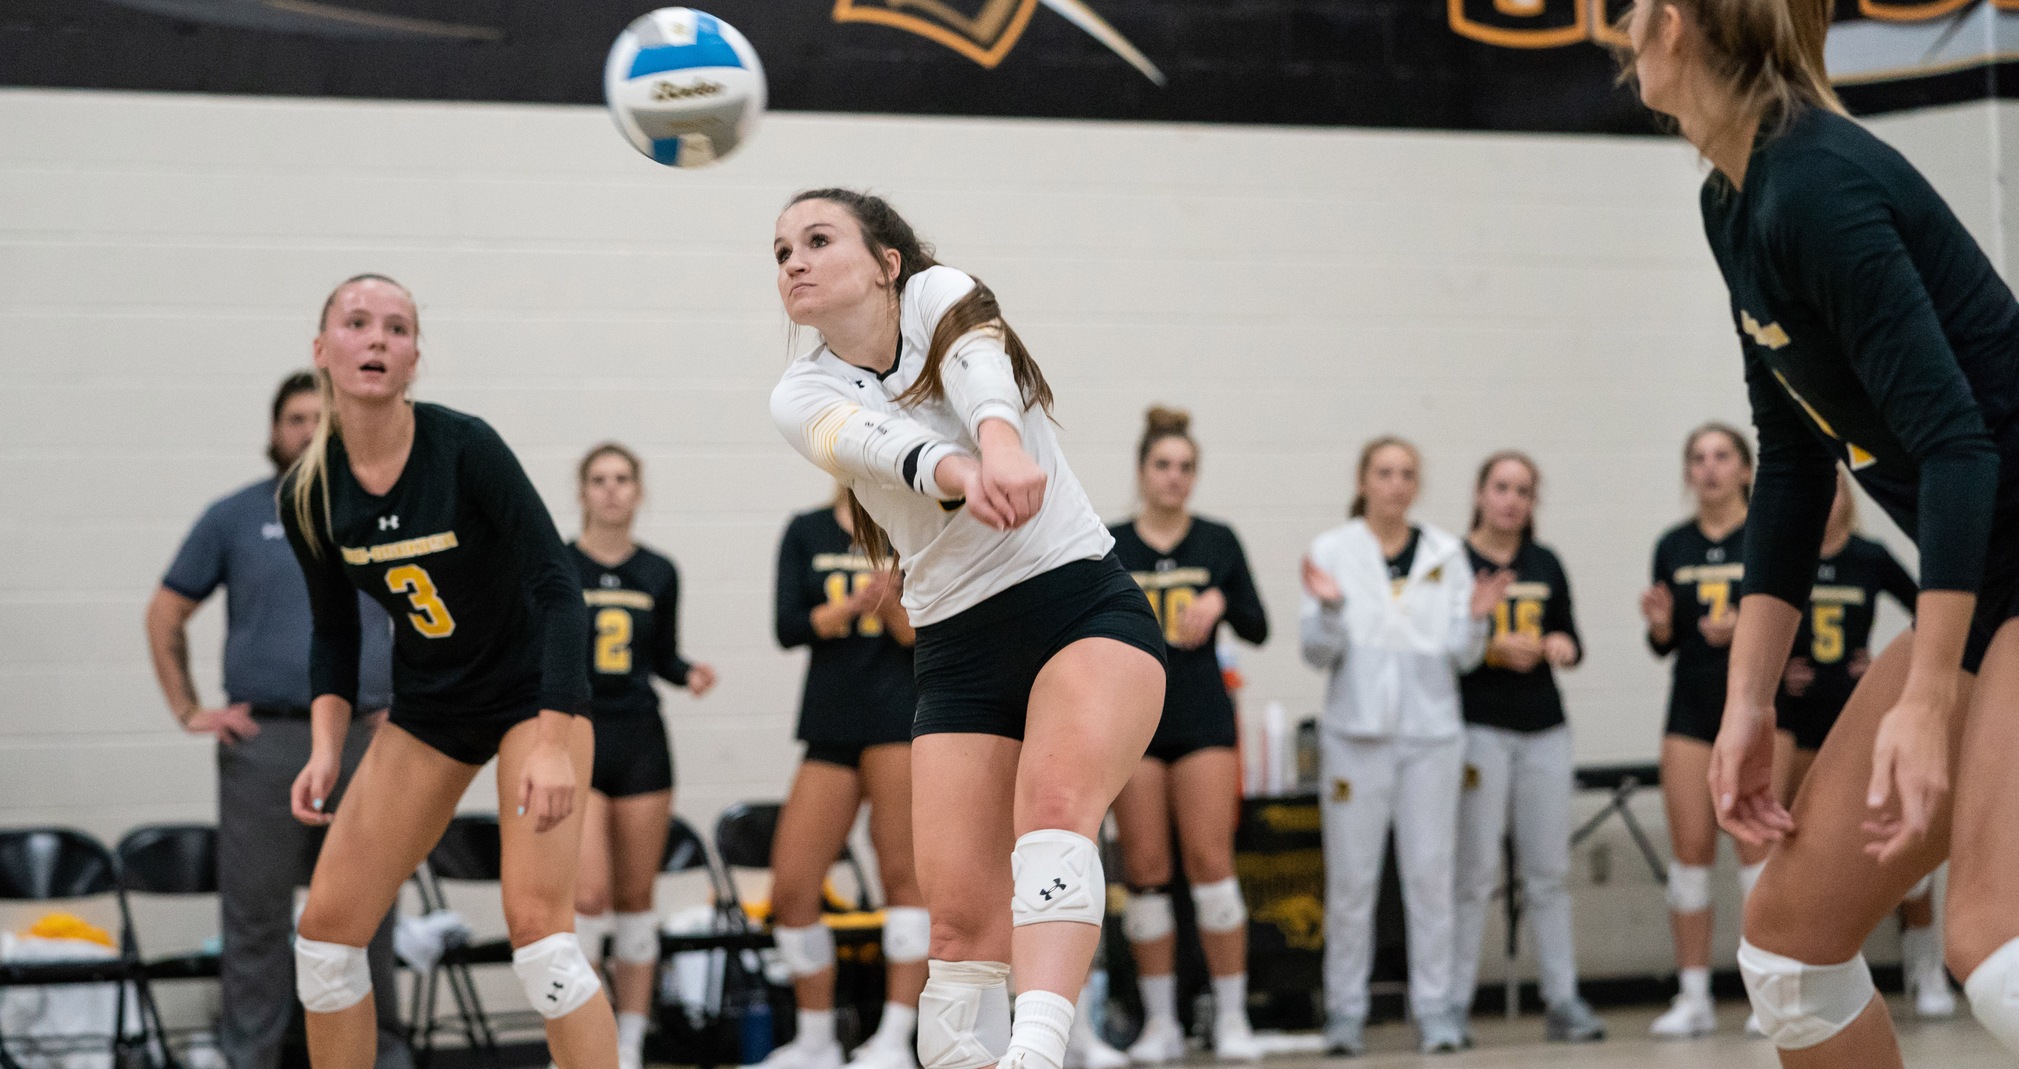 Rachel Gardner had 32 digs in Wednesday's two matches, including a season-high 23 against St. Norbert College.